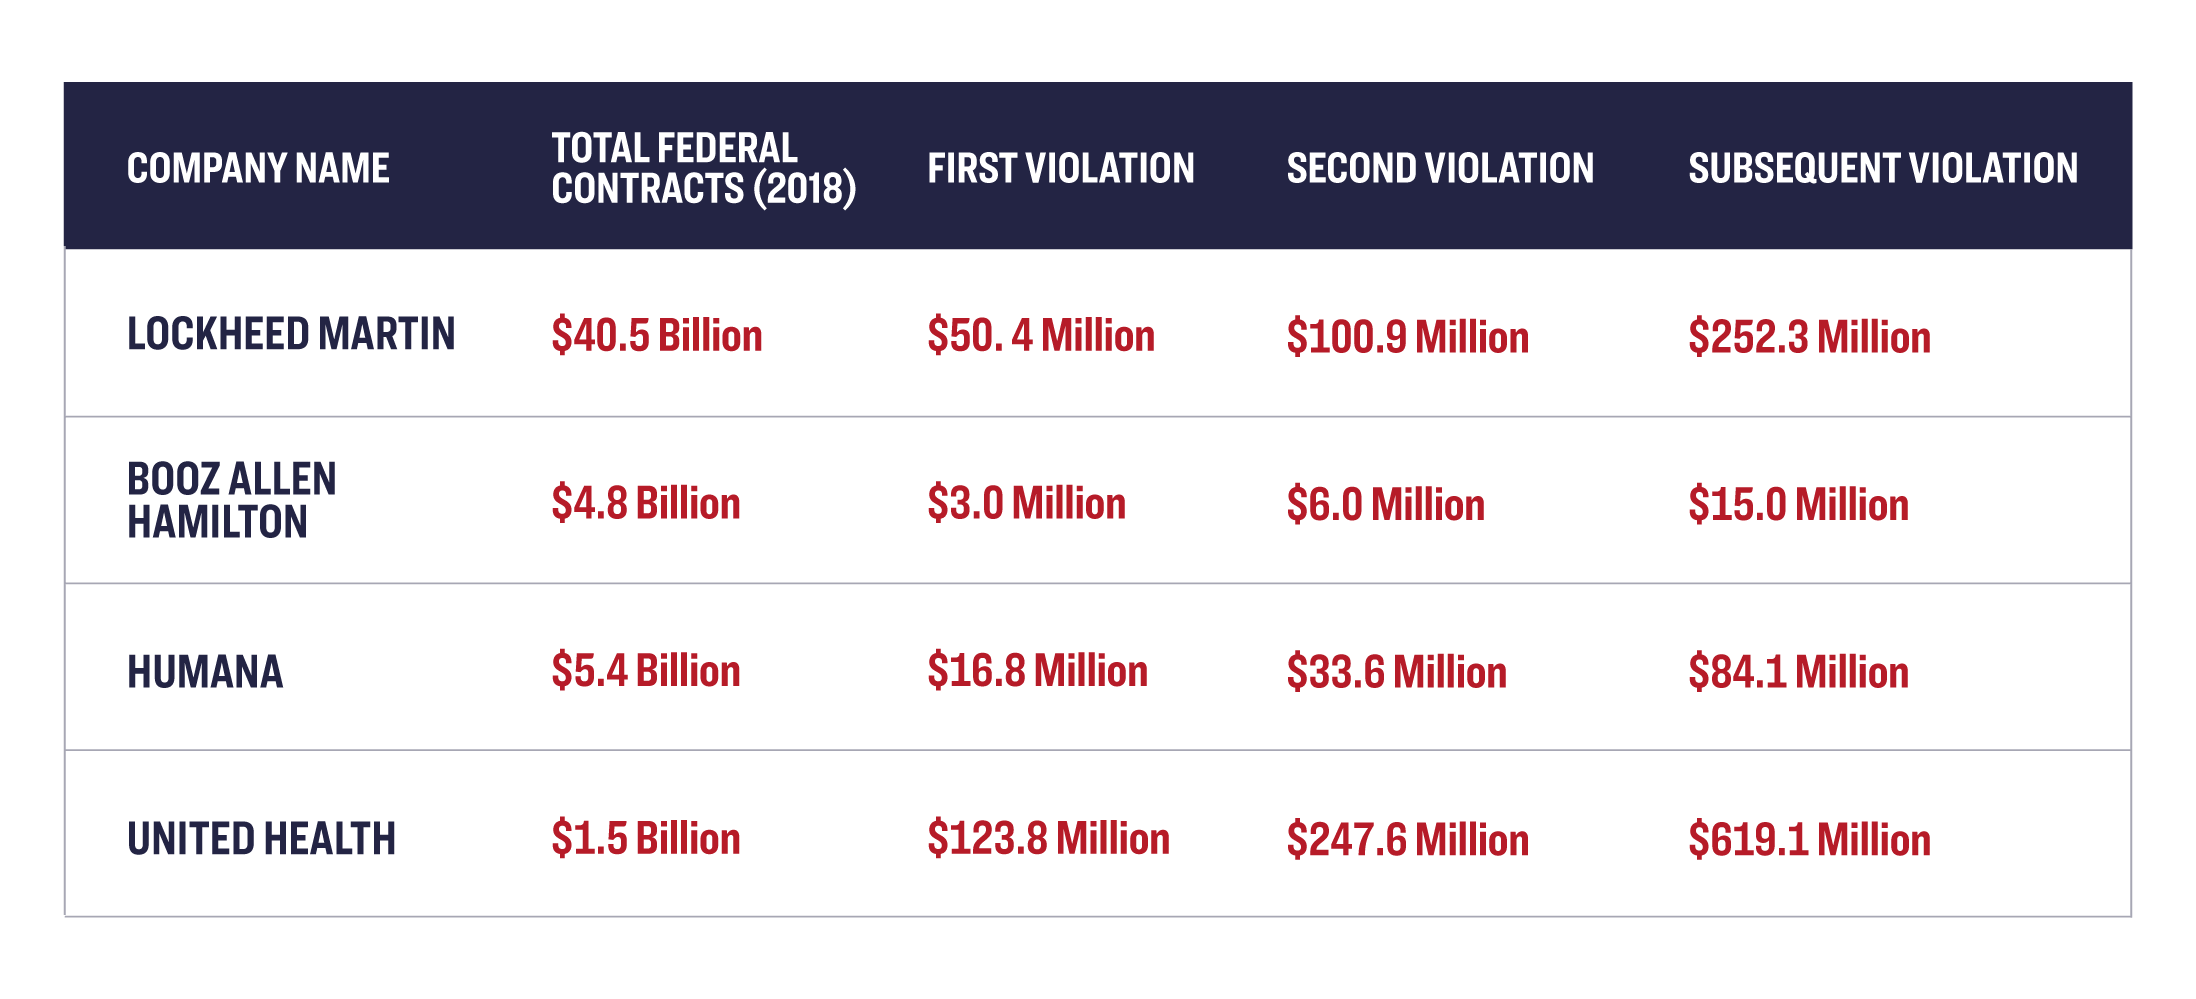 Table of Giant Contractors and Potential Fines for Violating Hiring Restrictions
(Based on 2018 Profits). Lockheed Martin: Total federal contracts (2018) $40.5 Billion, First Violation: $50.4 Million, Second Violation: $100.9 Million, Subsequent Violation $252.3 Million. Booz Allen Hamilton: Total federal contracts (2018) $4.8 Billion, First Violation: $3.0 Million, Second Violation: $6.0 Million, Subsequent Violation $15.0 Million.  Humana: Total federal contracts (2018) $5.4 Billion, First Violation: $16.8 Million, Second Violation: $33.6 Million, Subsequent Violation $84.1 Million. United Health: Total federal contracts (2018) $1.5 Billion, First Violation: $123.8 Million, Second Violation: $247.8 Million, Subsequent Violation $619.1 Million. 
